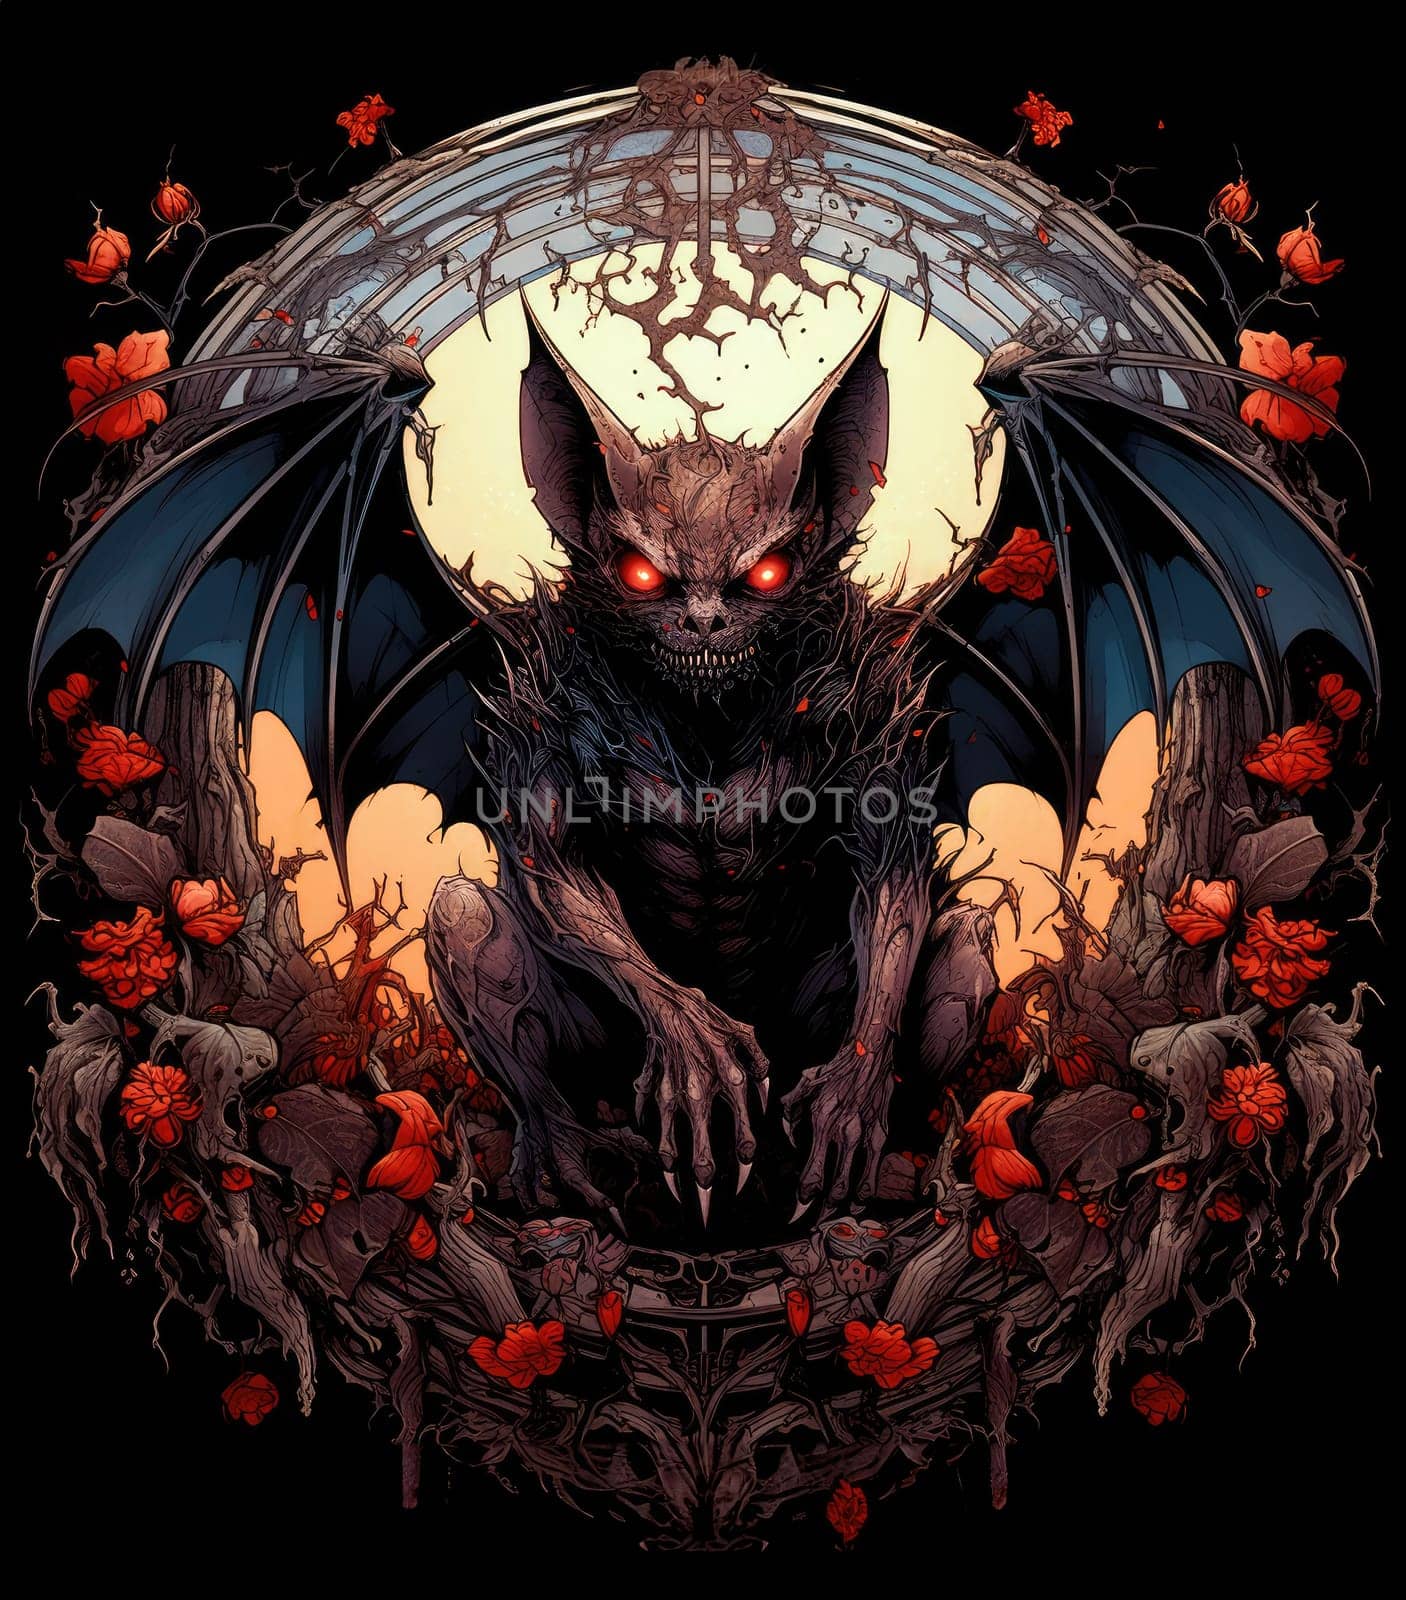 An ominous bat with wings spread. Surrealistic image of a flying vampire monster. Template for poster, t-shirt, sticker, etc.